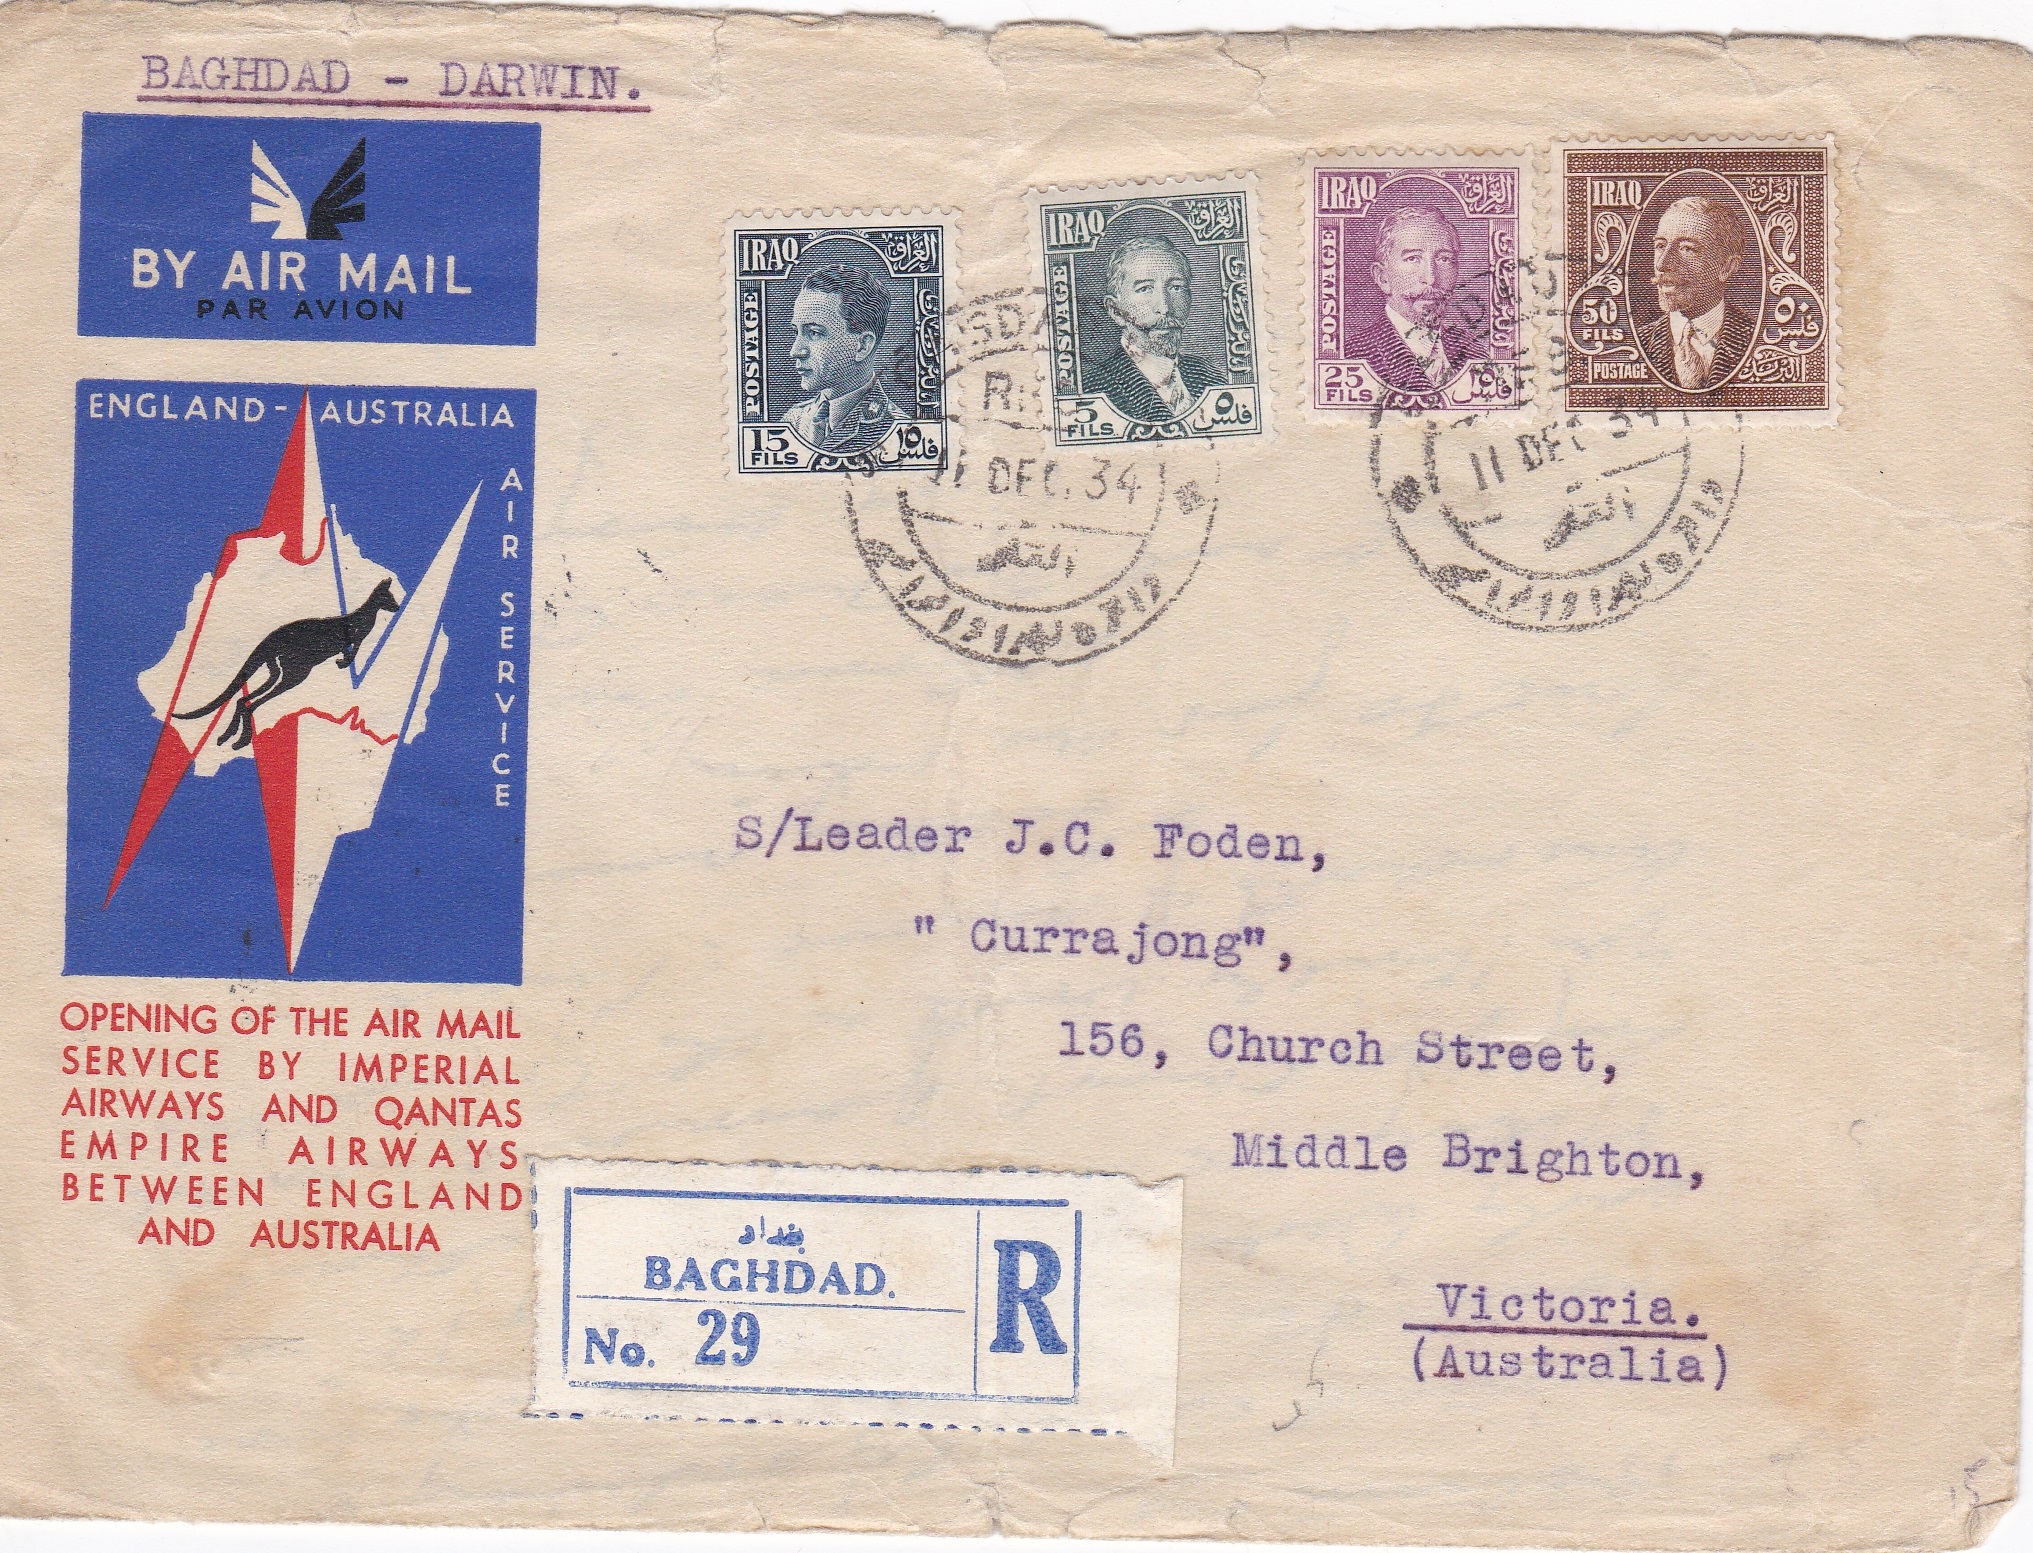 Iraq 1934-Registered airmail commemorative envelope with contents posted to Middle Brighton,